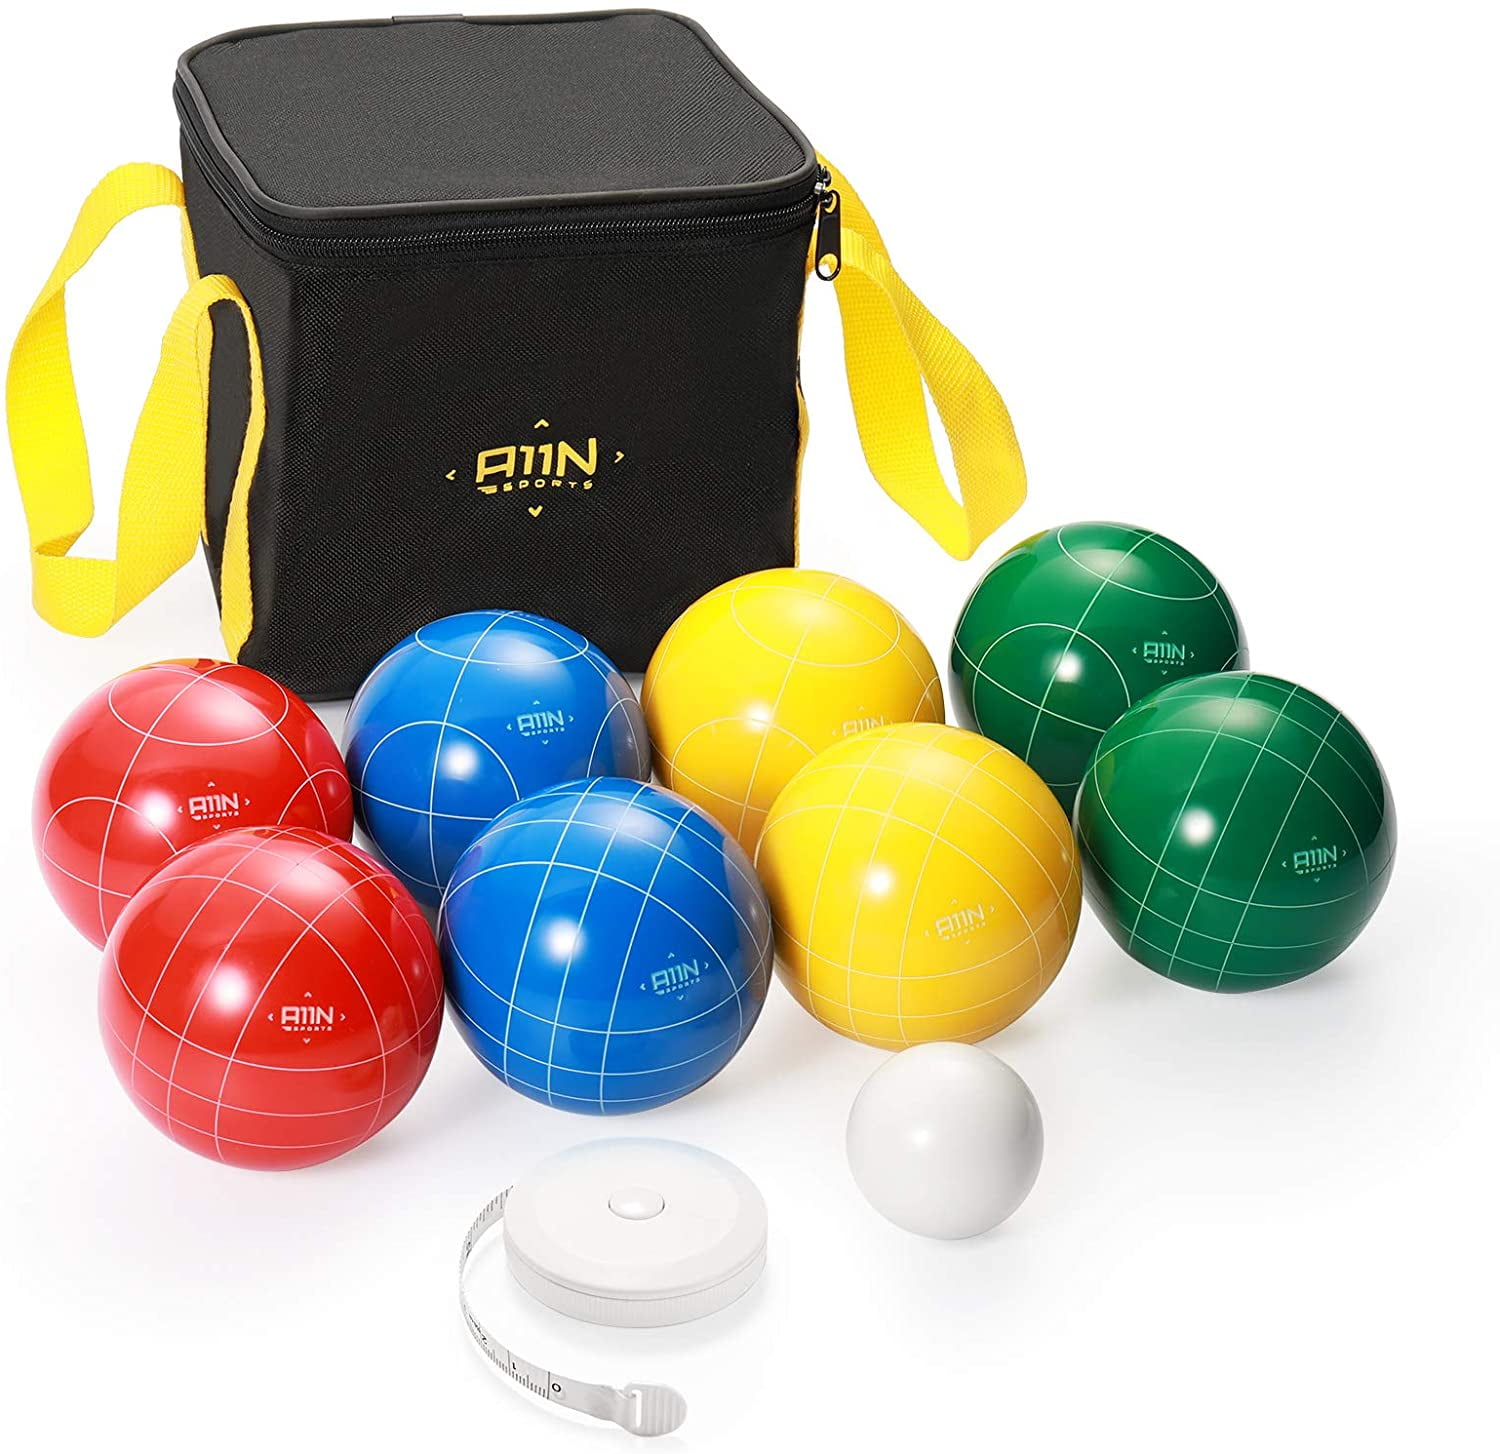 2-8 Players Bocce Balls Game for Outdoor Yard Backyard Lawn Beach Carrying Bag 107mm Bocci Ball Set with 8 Resin Balls Pallino Aivalas Bocce Ball Set Measuring Tape 